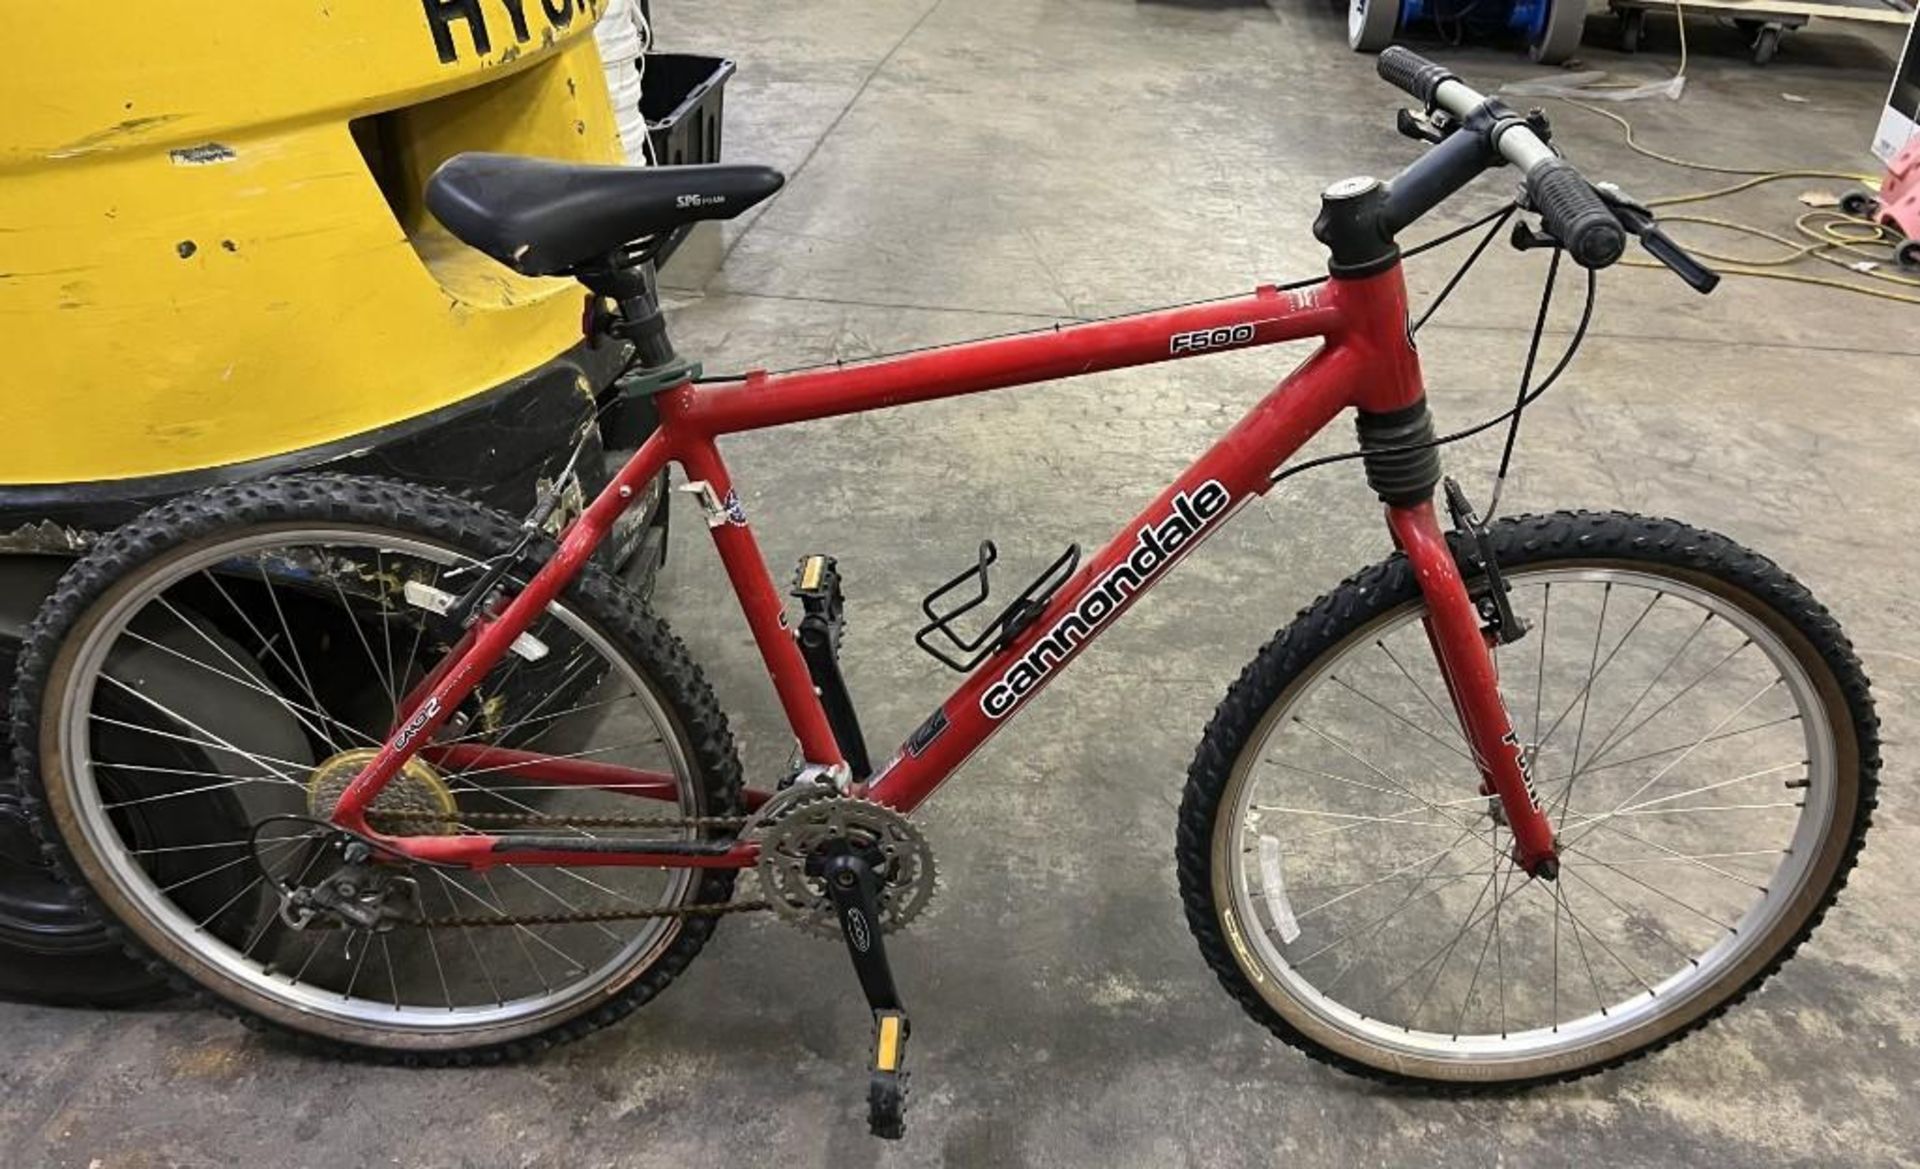 Cannondale F500 Bicycle (located offsite at: Located at: 3785 W 1987 S. SLC, UT 84104 pick-up times